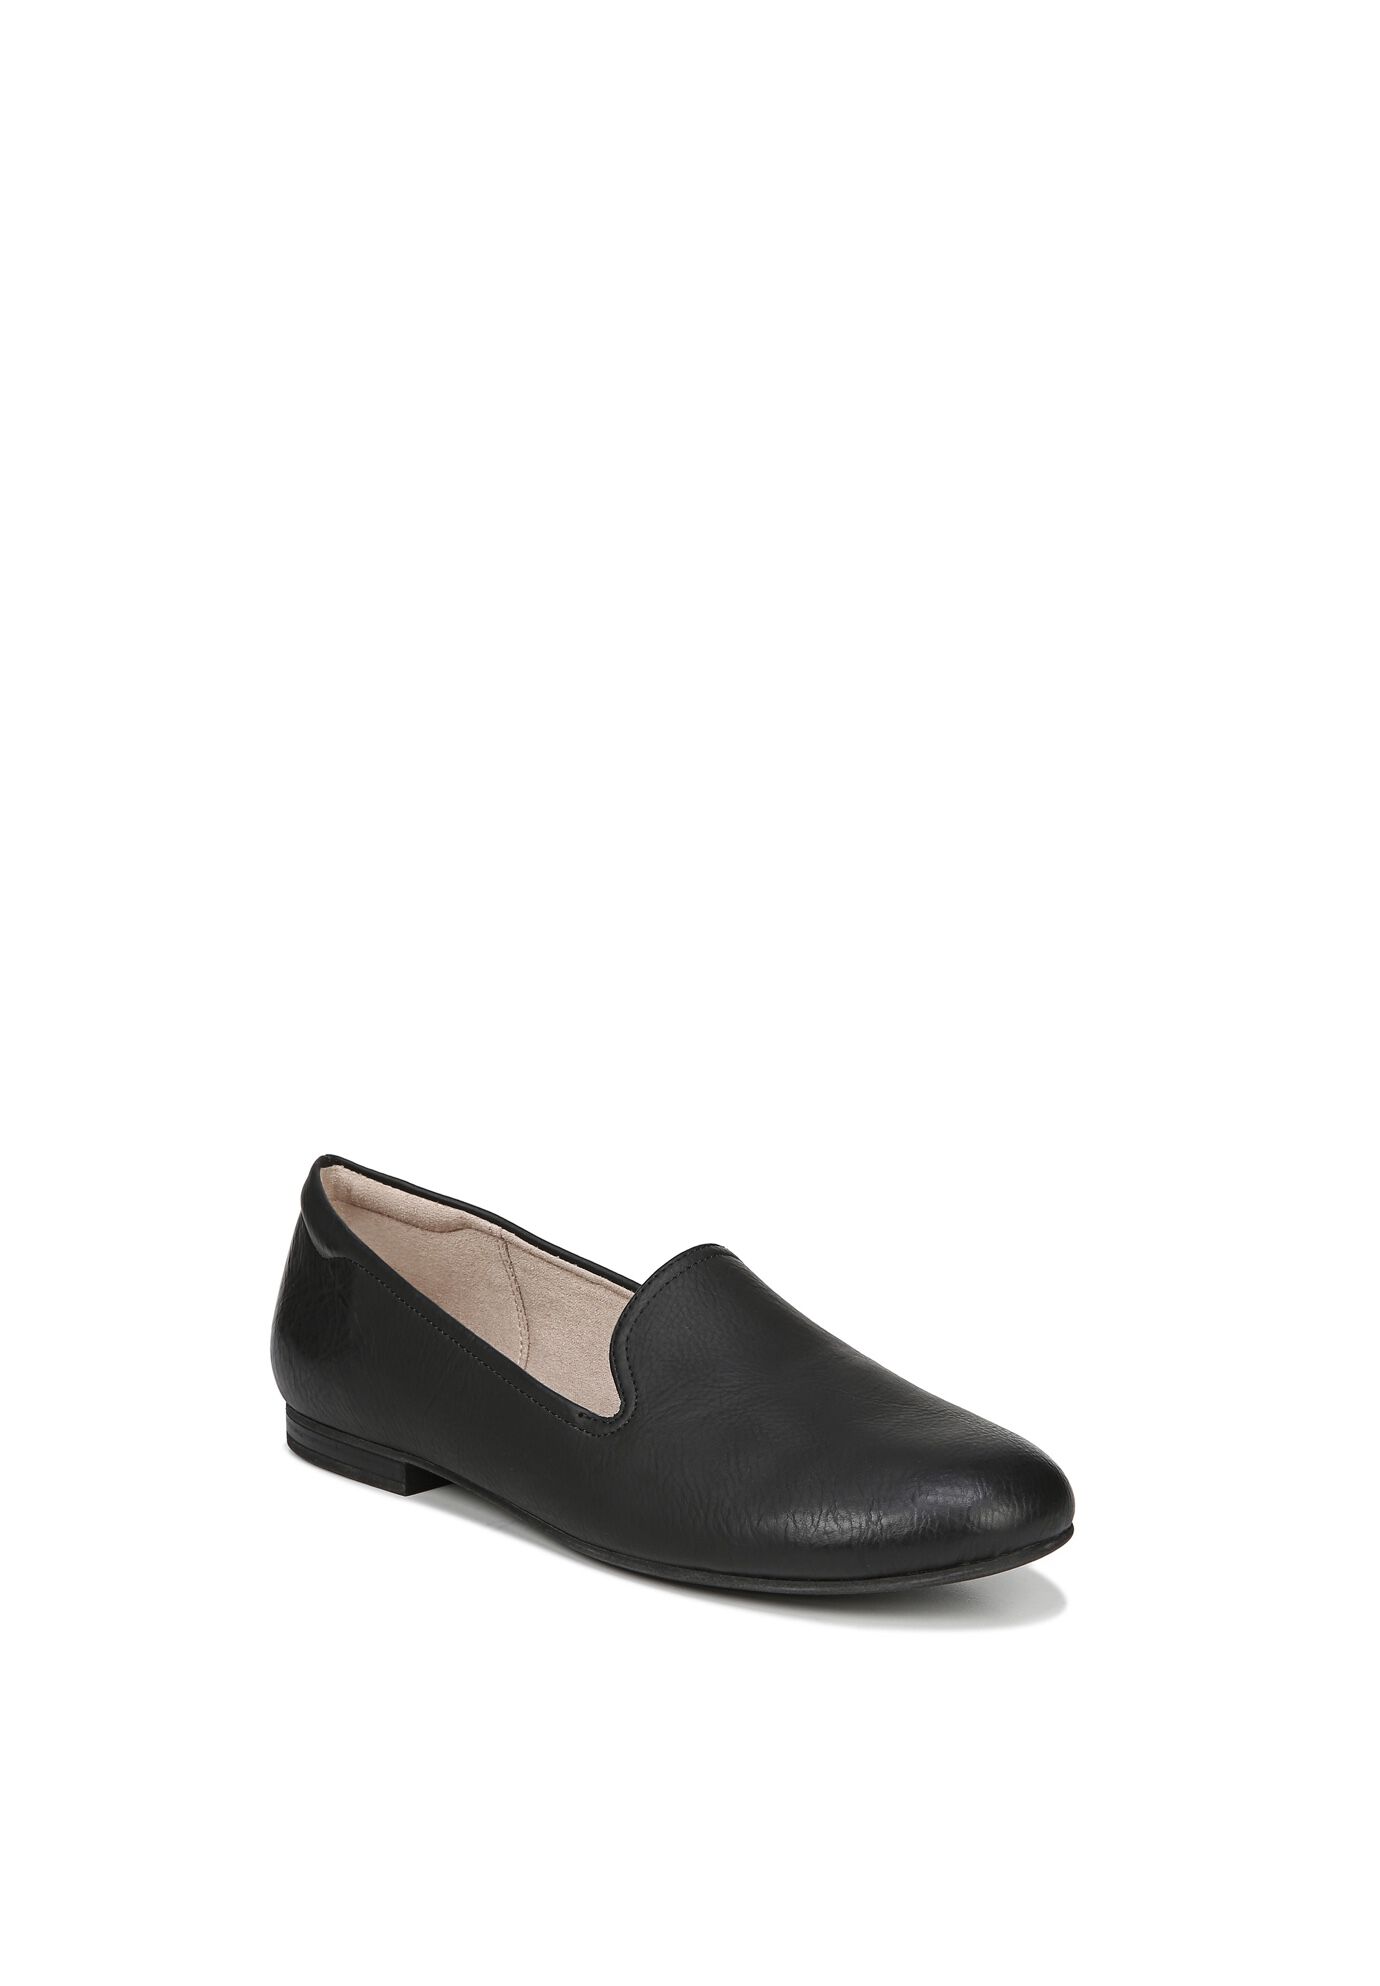 Wide Width Women's Alexis Loafer by Naturalizer in Black (Size 7 1/2 W)